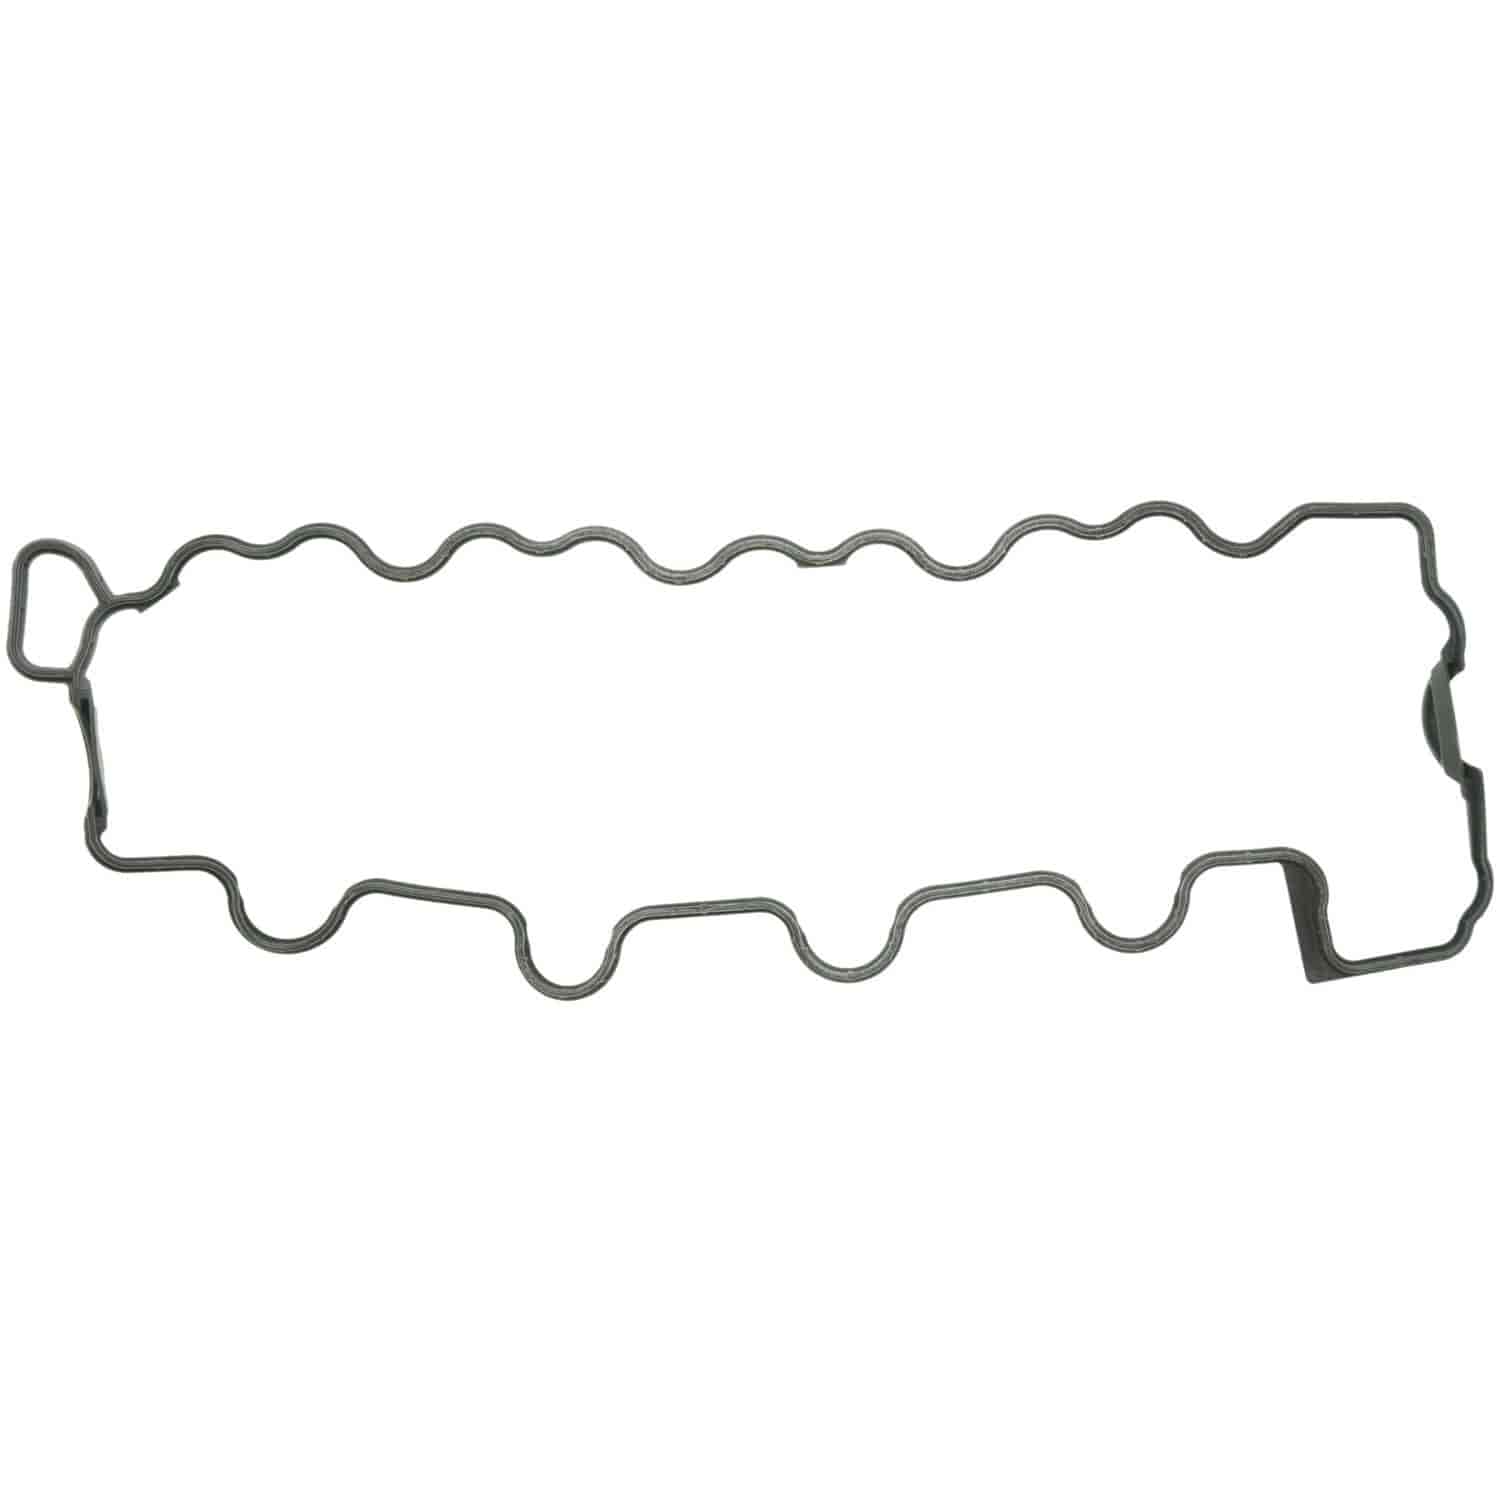 Valve Cover Gasket Right MERCEDES 4973CC 5.0L 113 SERIES 1999-2008